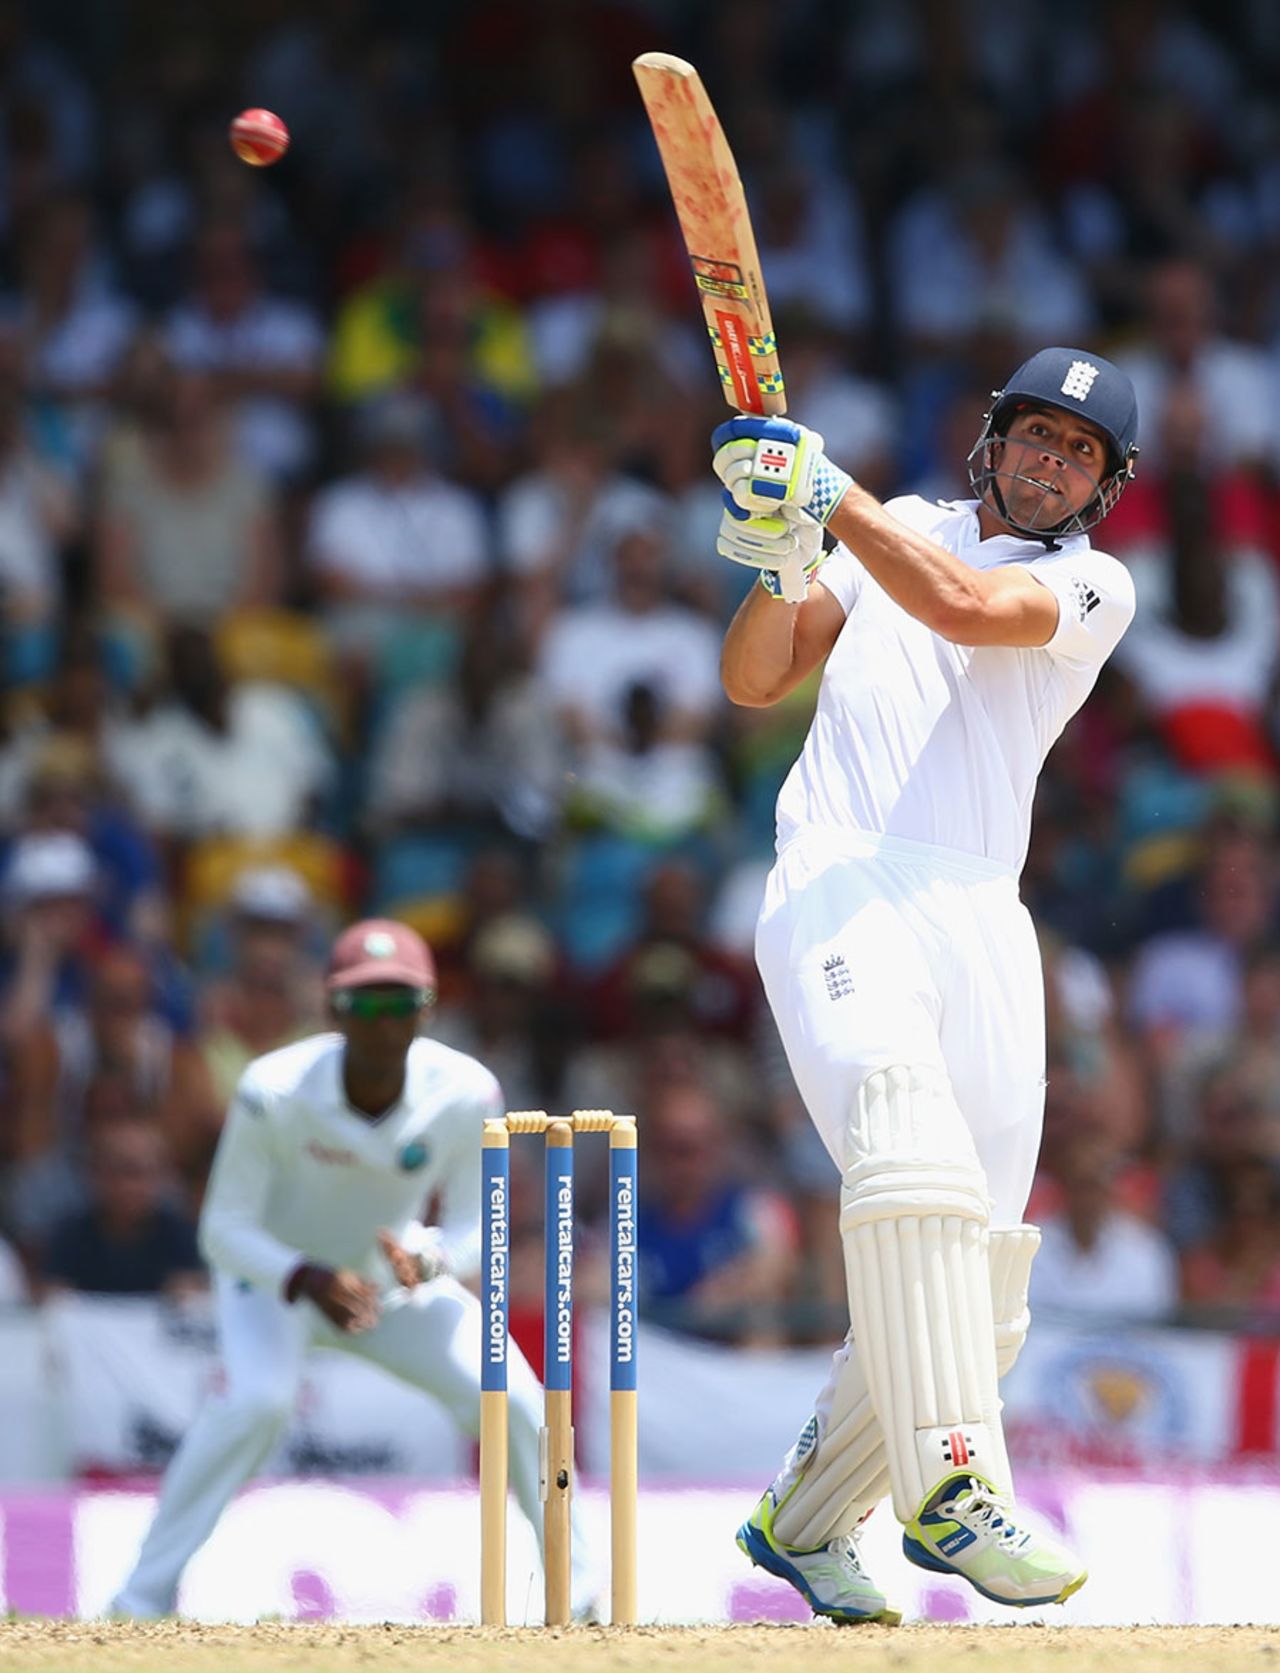 Alastair Cook made a confident start, West Indies v England, 3rd Test, Bridgetown, 1st day, May 1, 2015